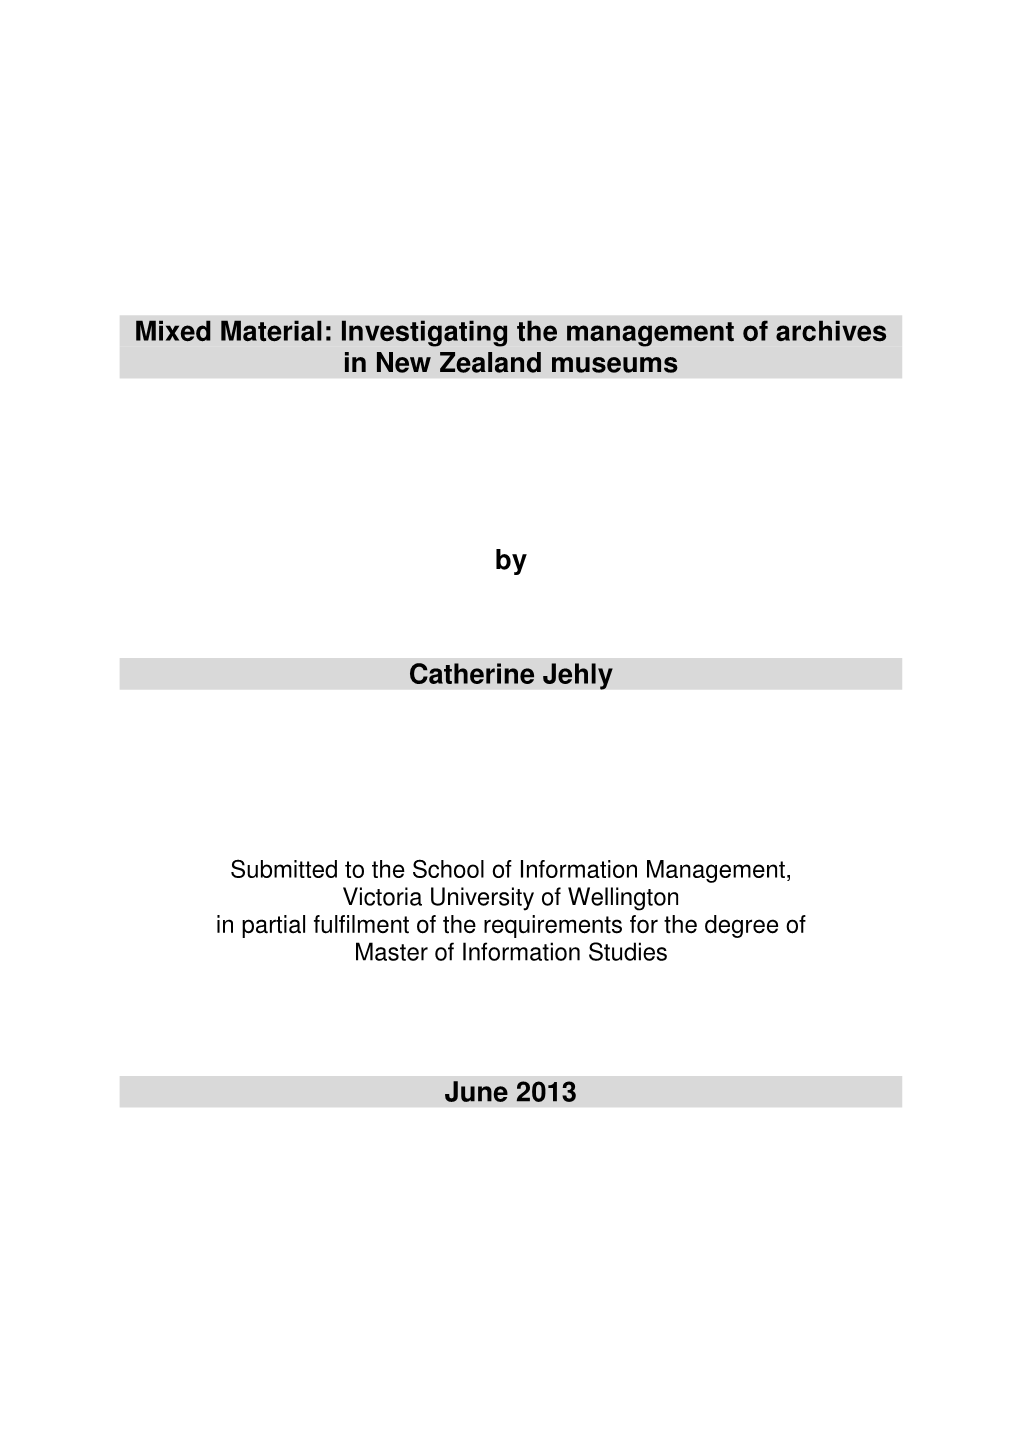 Investigating the Management of Archives in New Zealand Museums